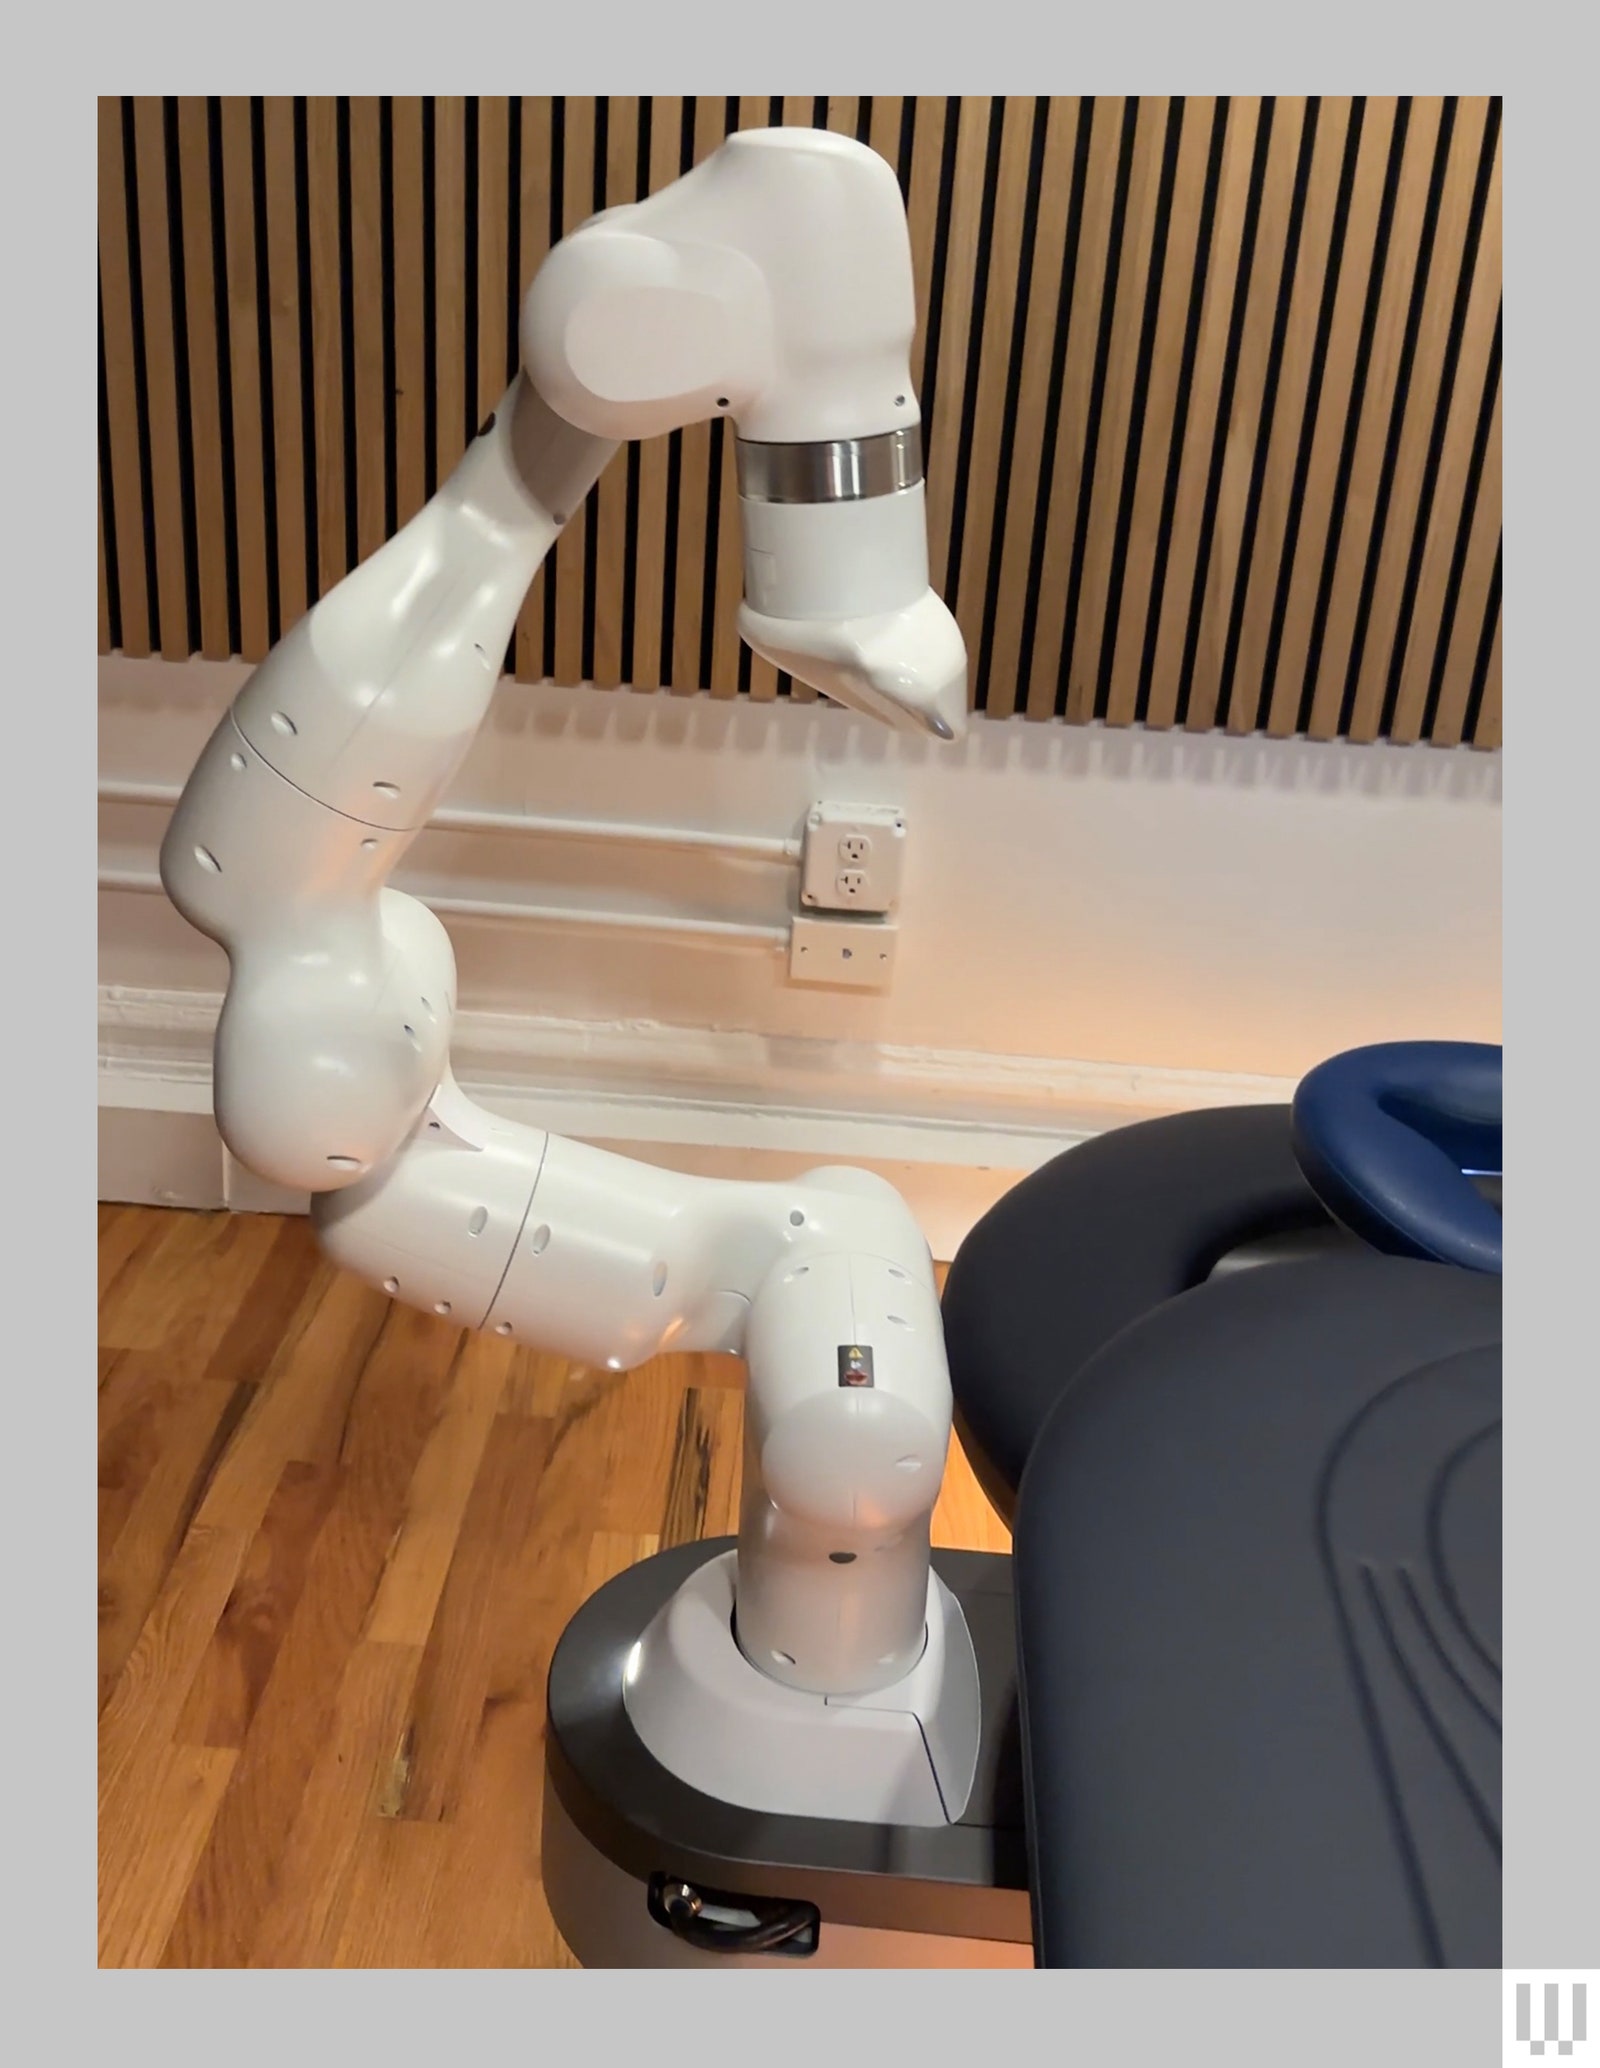 Side viw of white robotic arm attached to black padded massage table